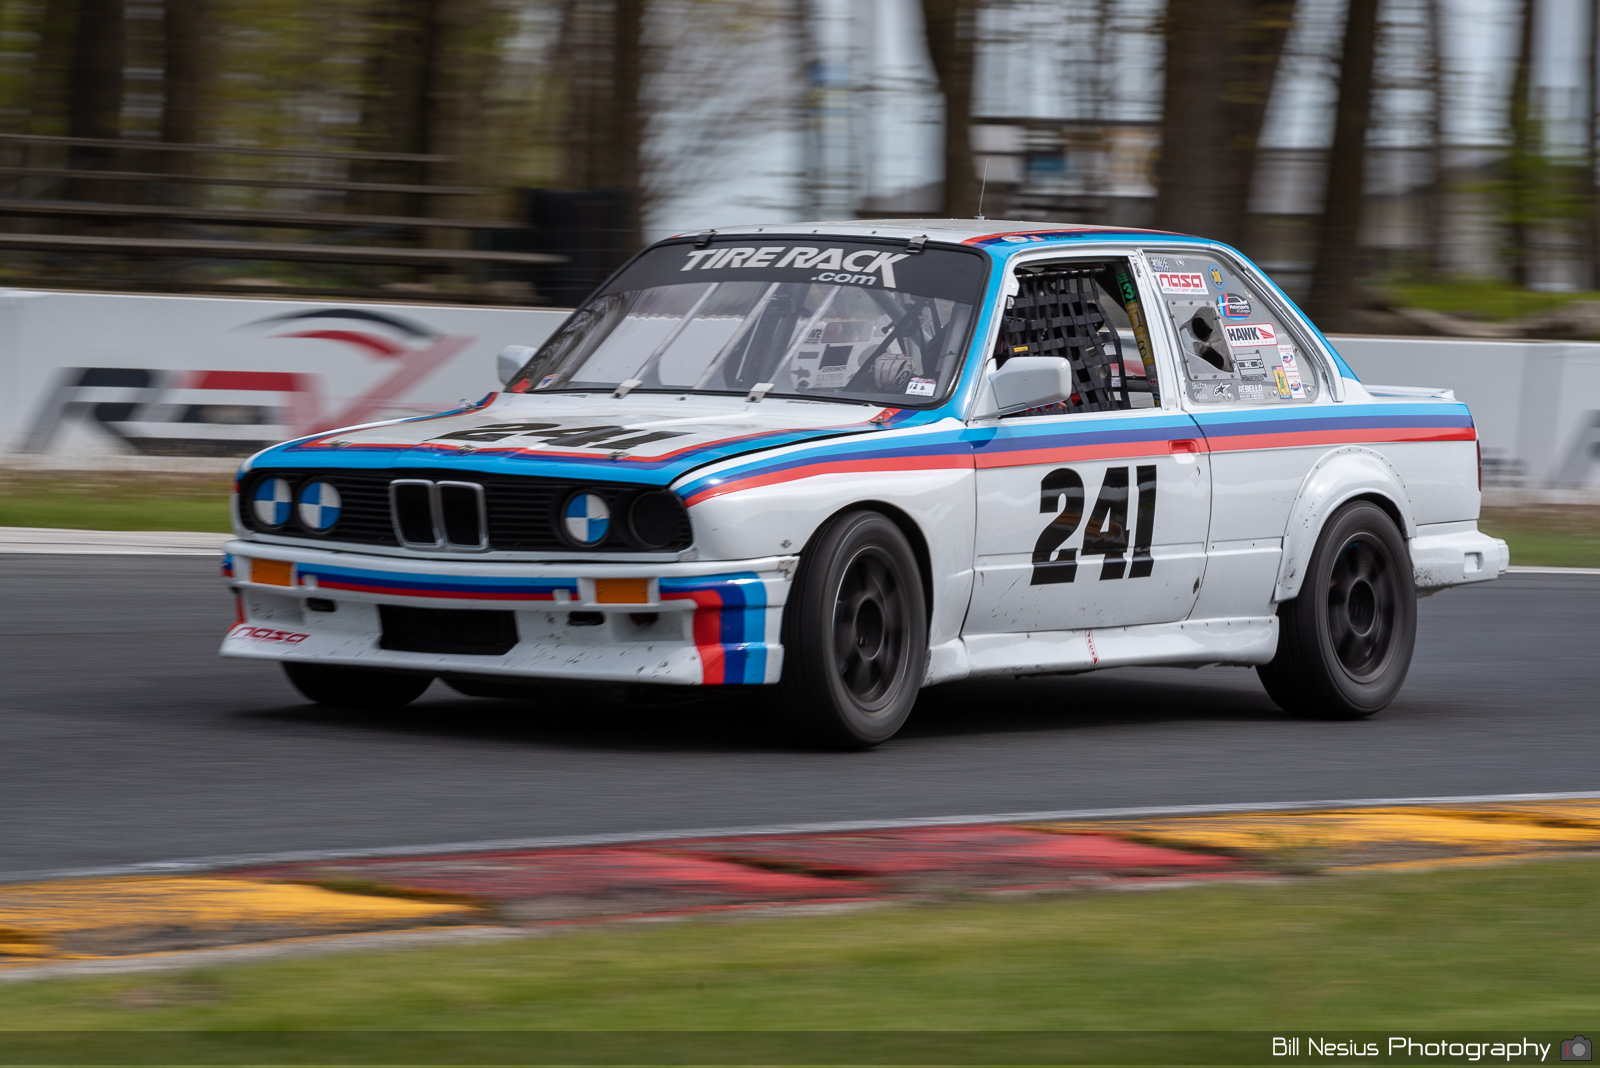 1991 BMW 318is Number 241 / BAN_1676 / 